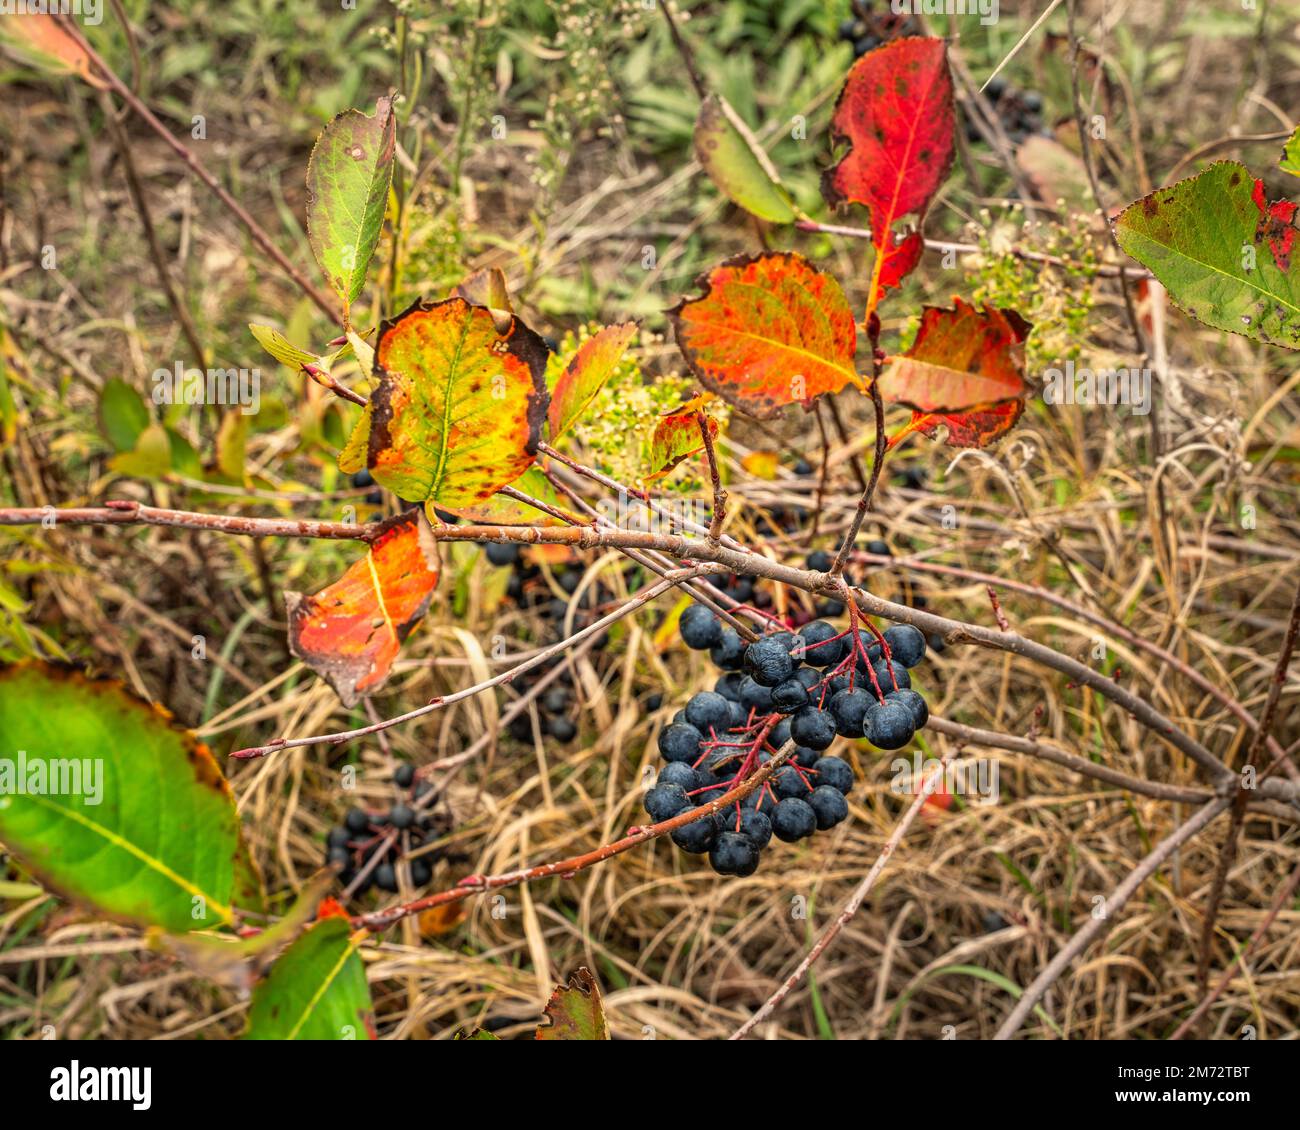 Cluster of black chokeberry fruits, Aronia Melanocarpa, on the branch of a bush in the countryside. Black fruits are rich in vitamin C and vitamin K. Stock Photo